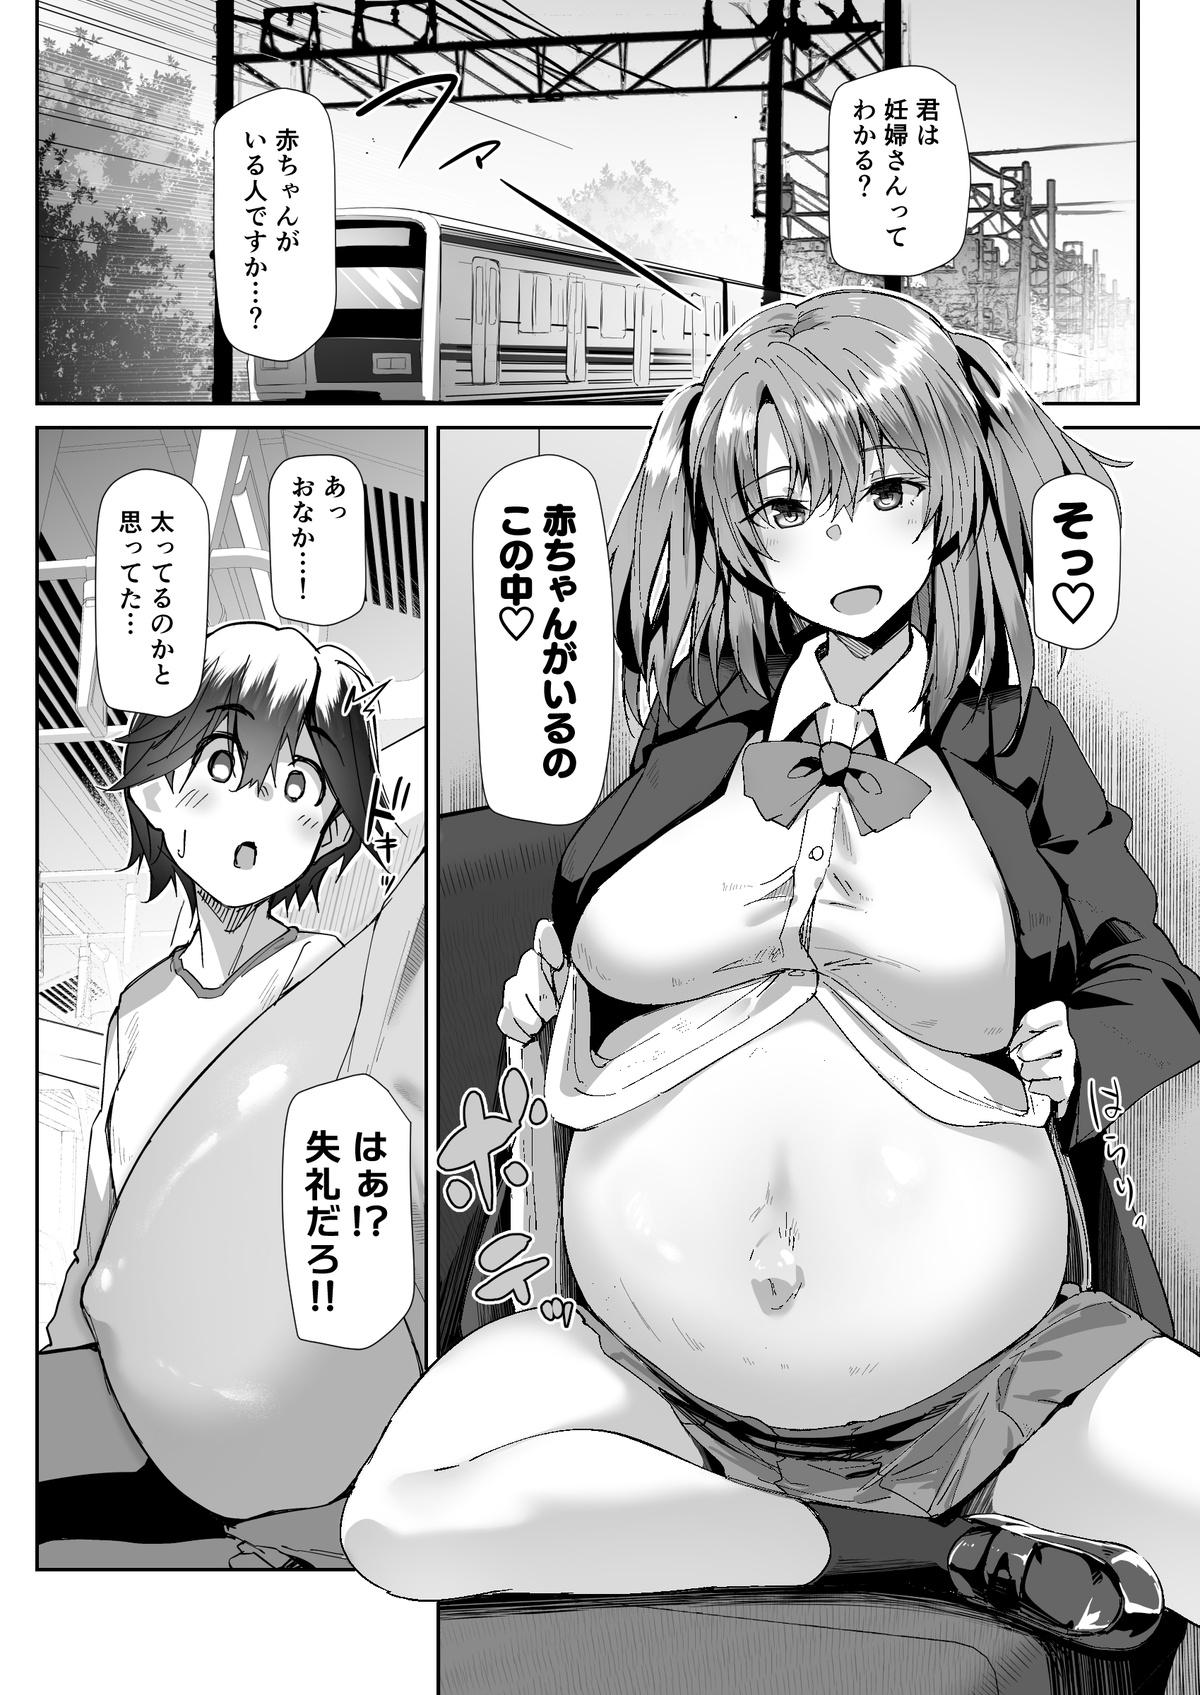 A Cartoon of a JK Pregnant Woman Preying on Shota Who Sat on Priority Seat 2